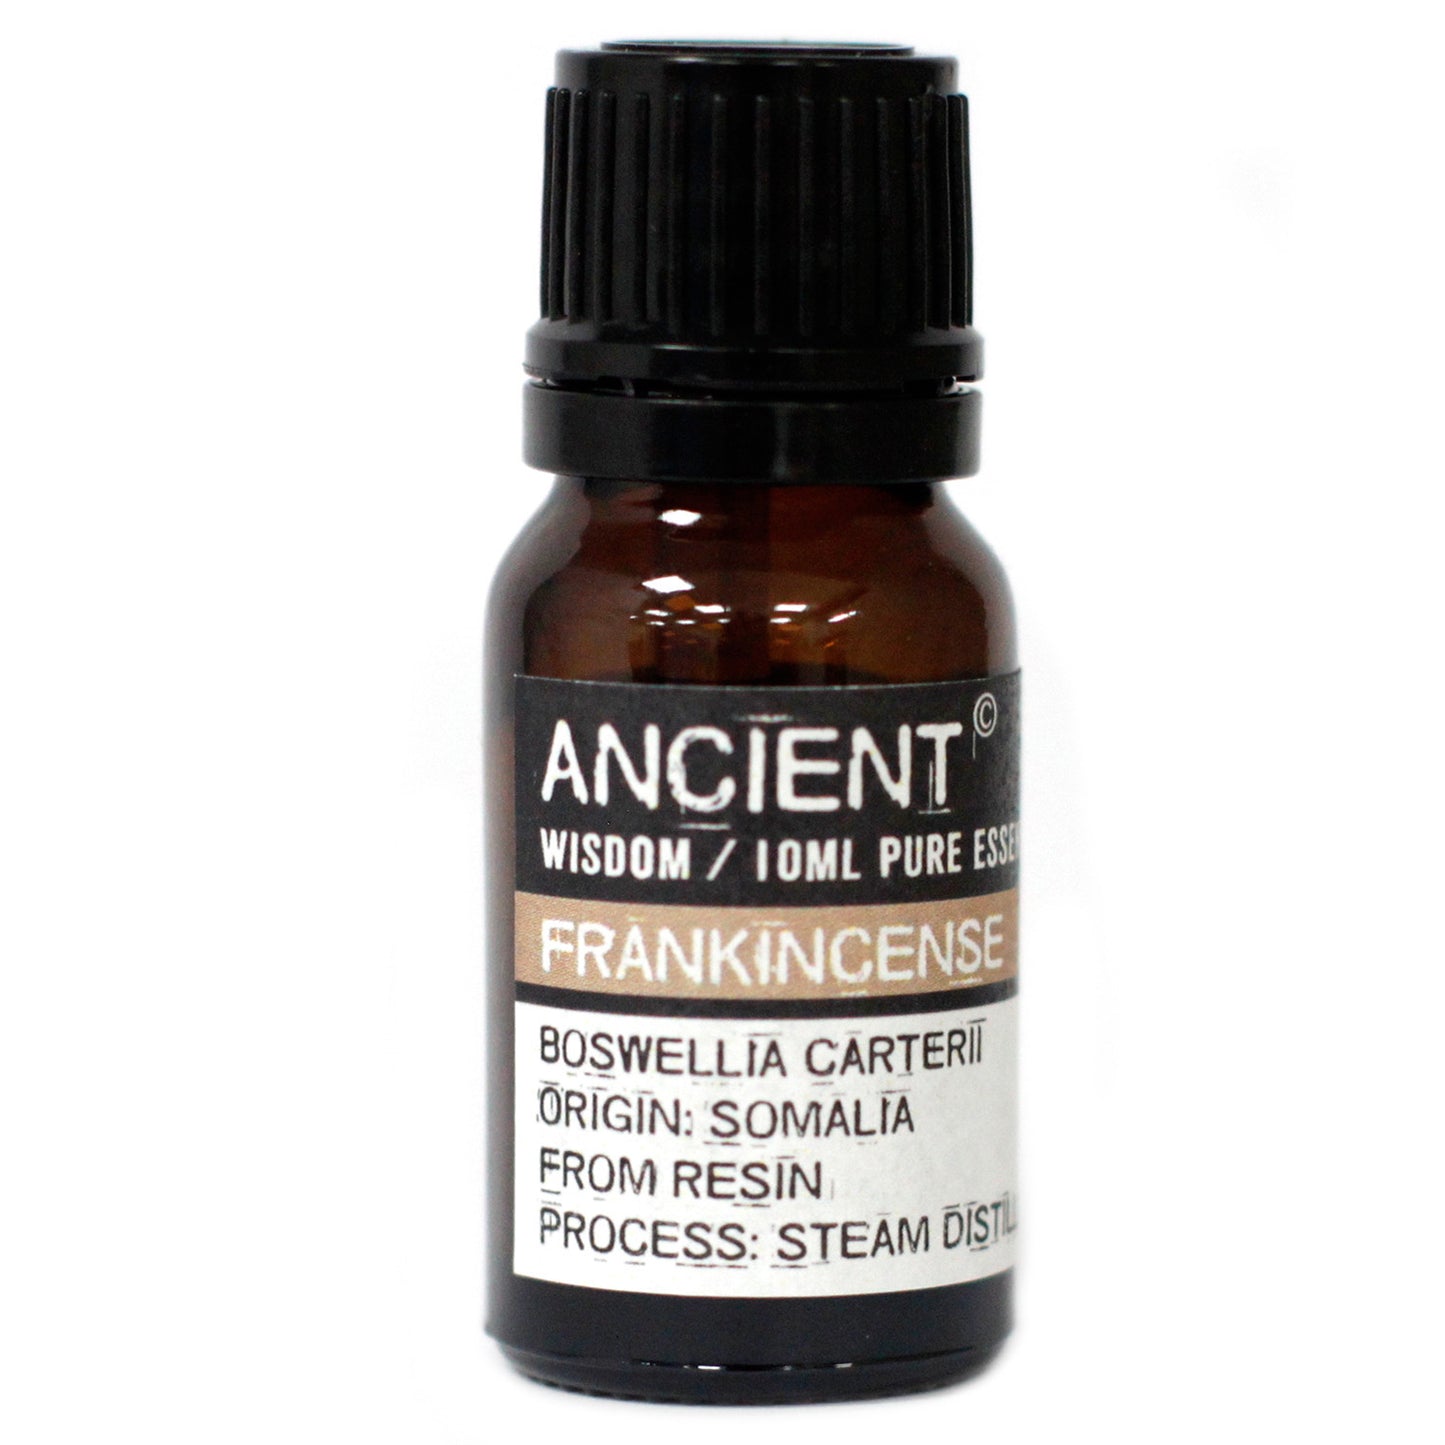 10 ml Frankincence Essential Oil